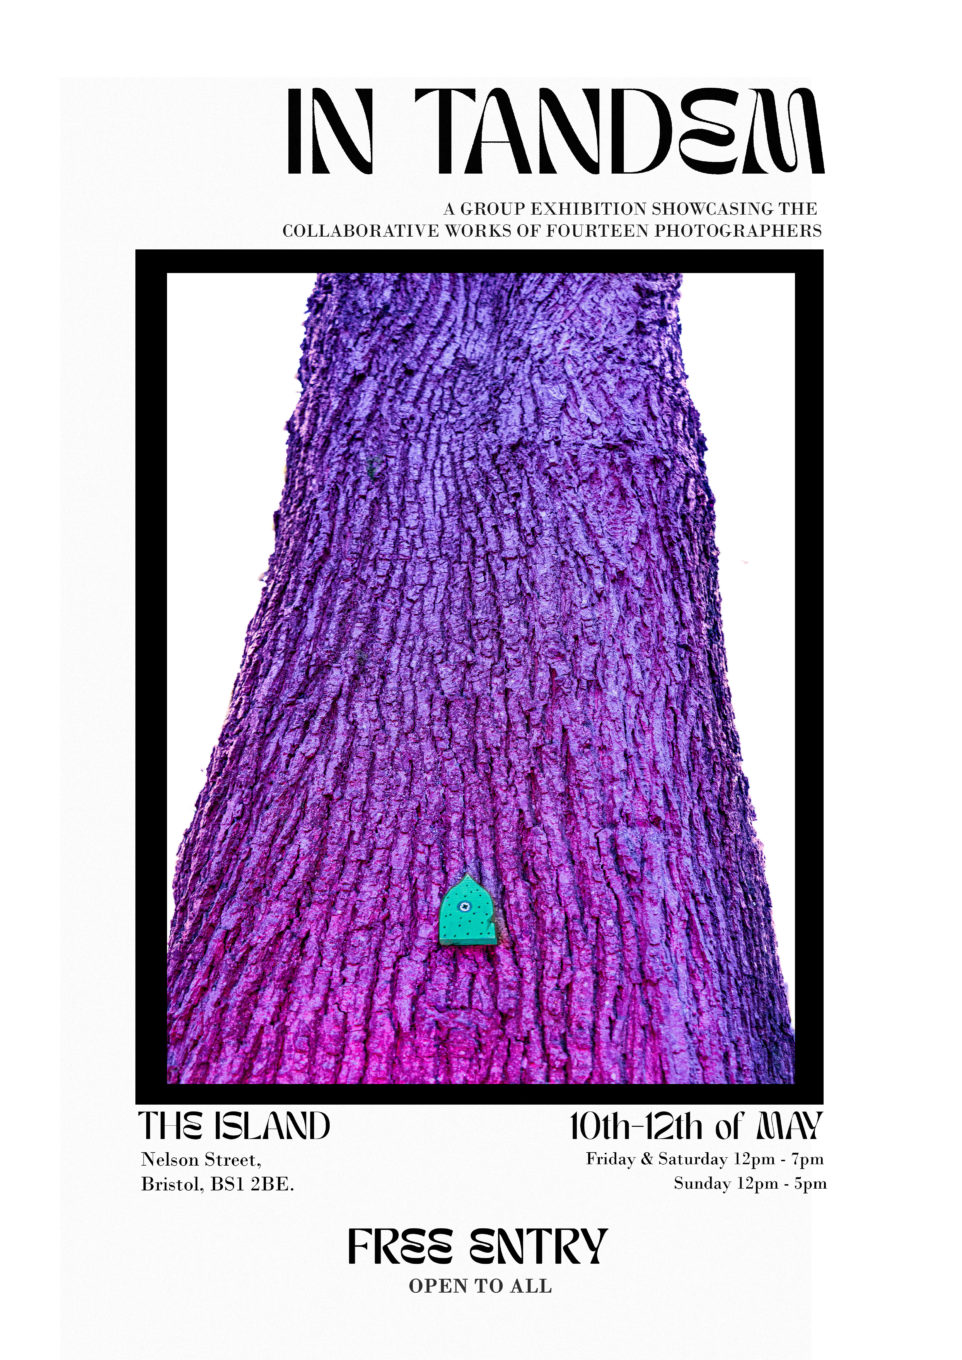 A purple tree trunk extends upwards with a tiny door at the base